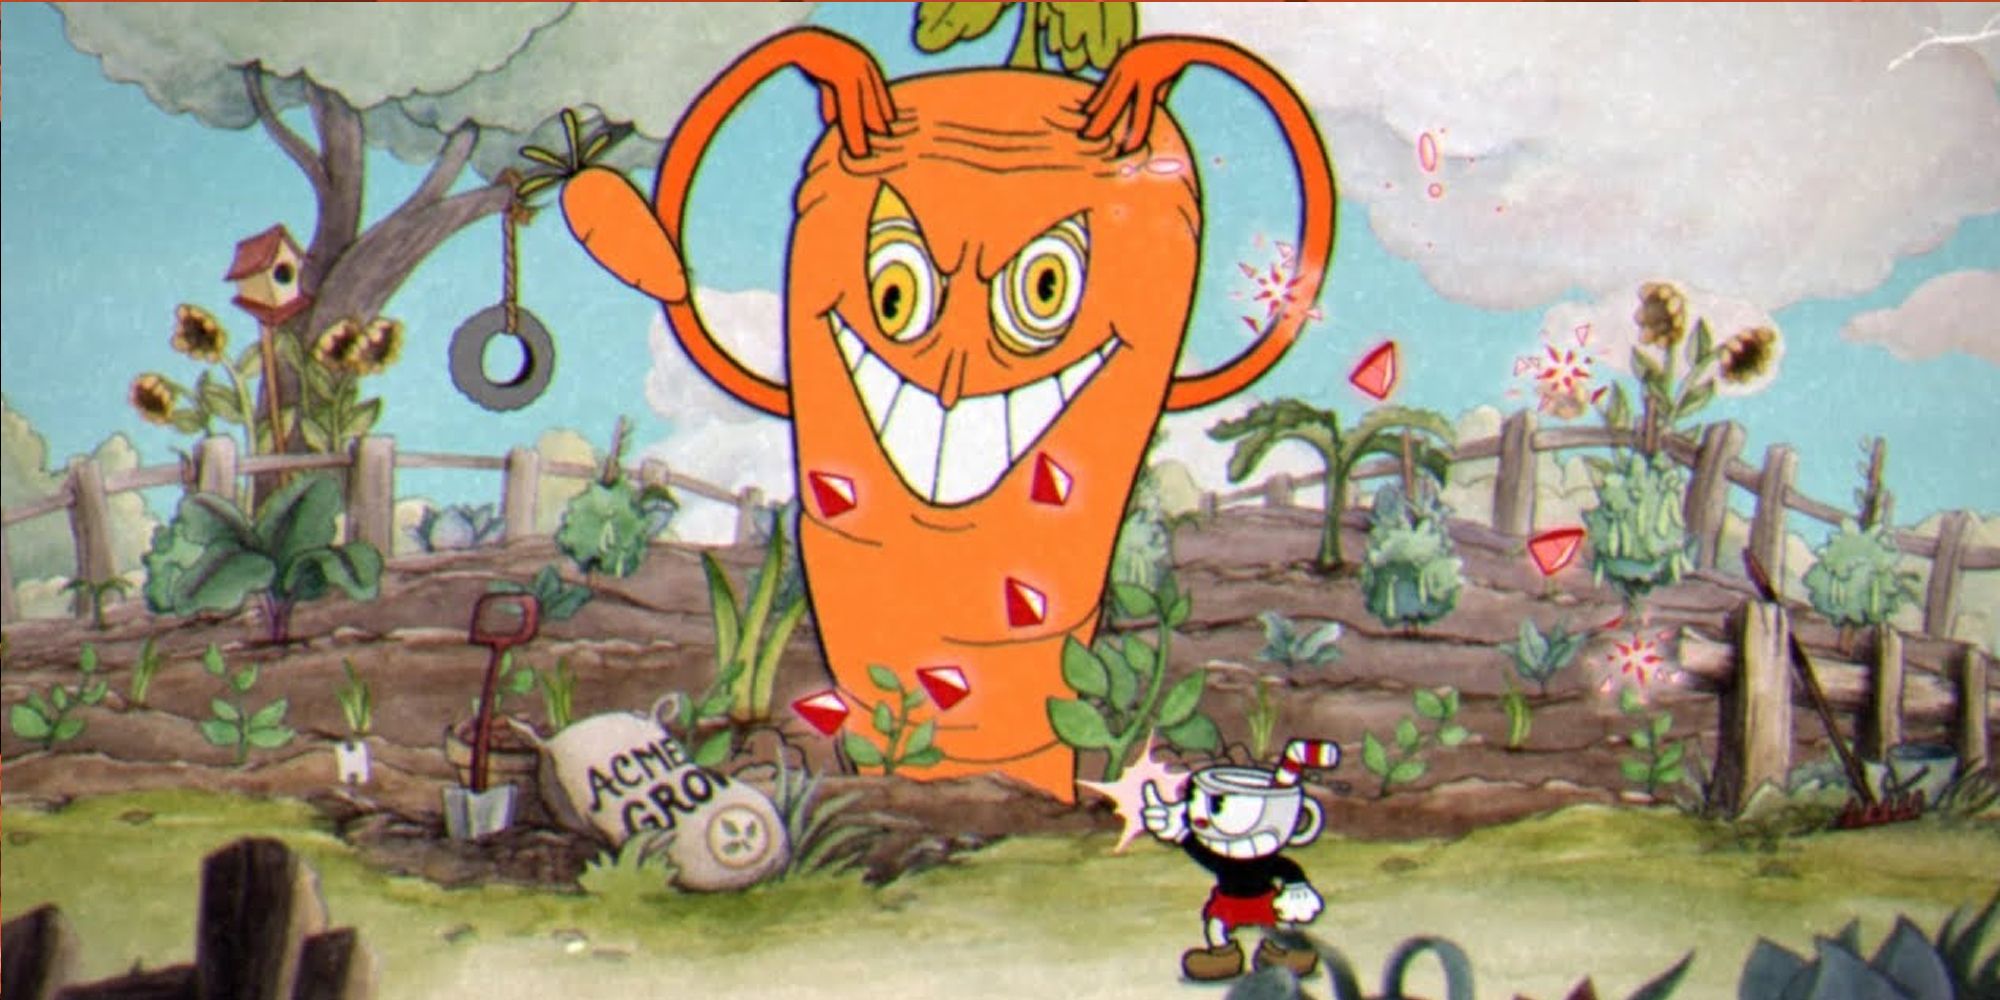 The Root Pack boss fight in Cuphead